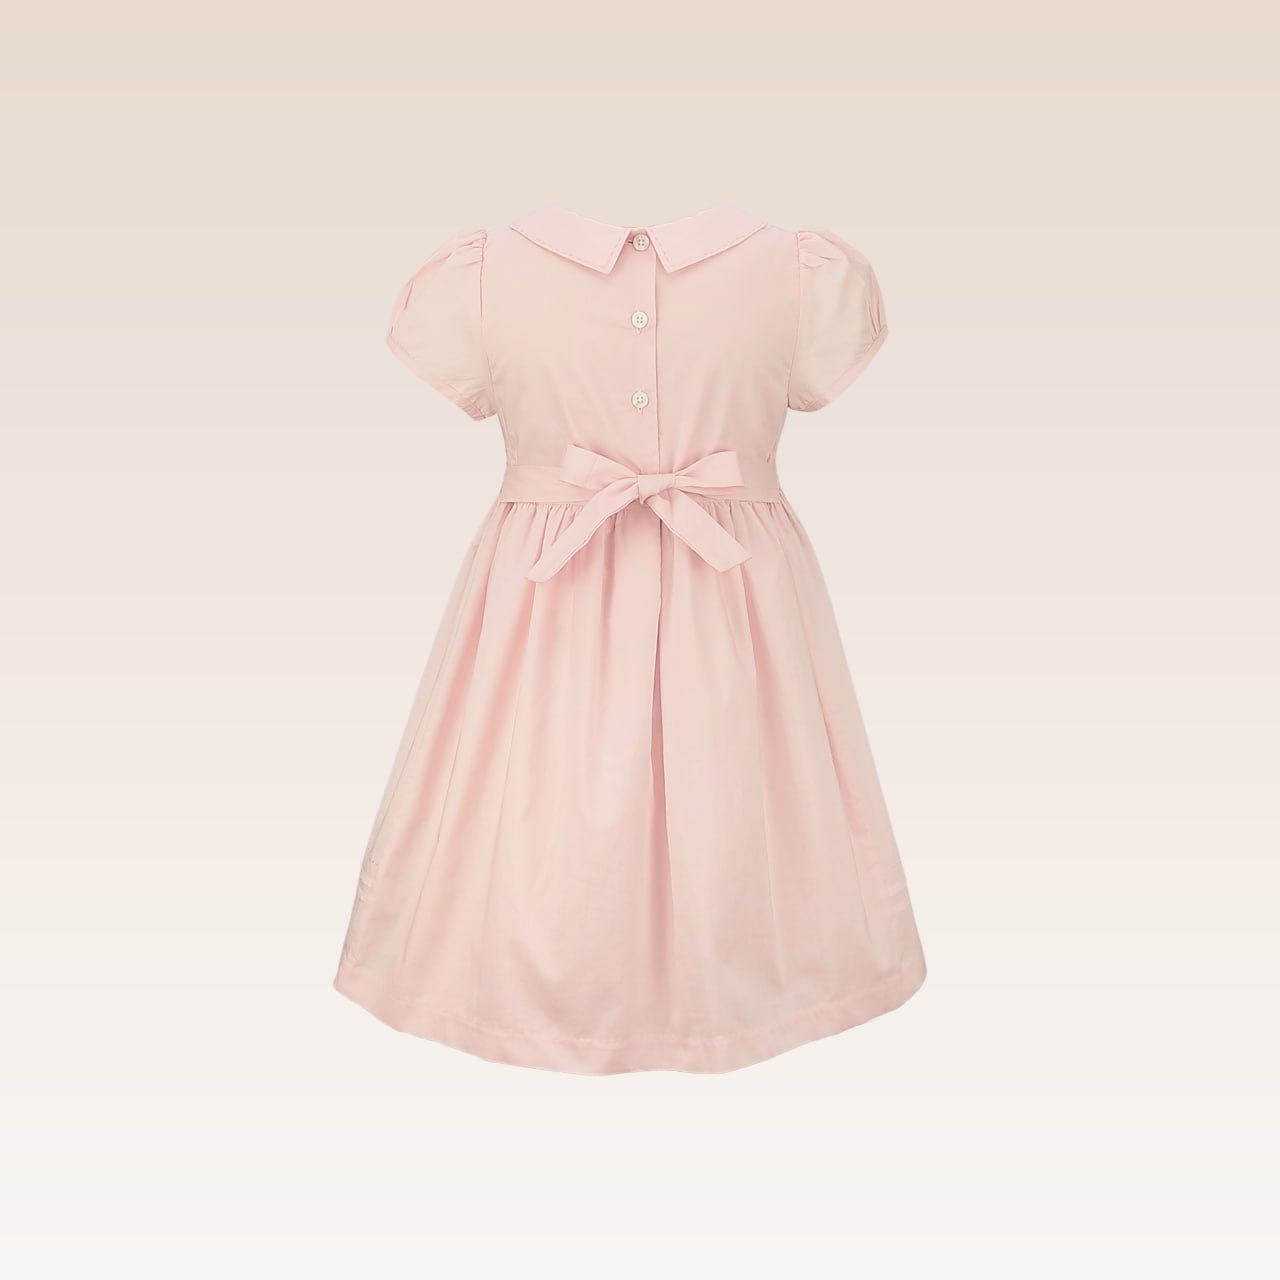 Hazel Girls Pink Dress with Smock and Embroidery details